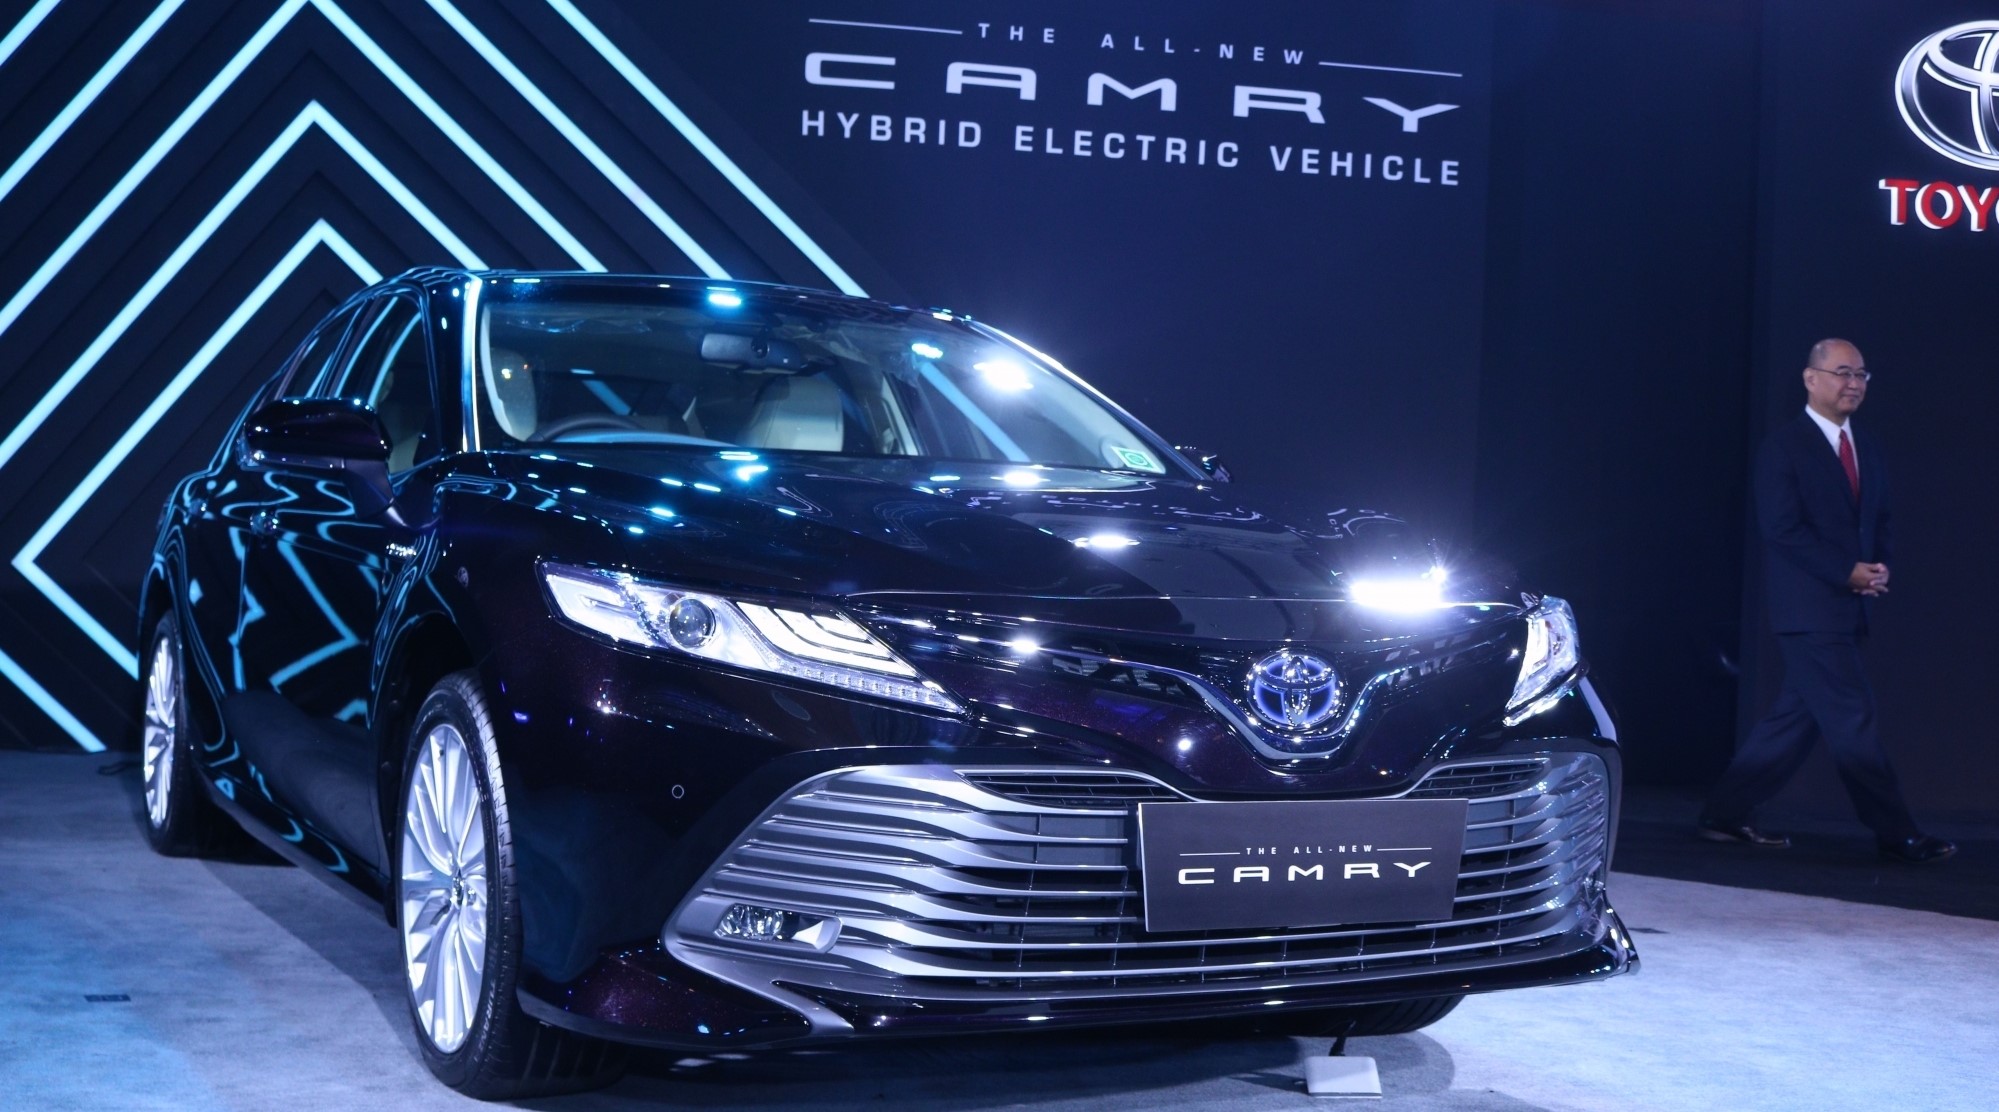 Central Govt notifies second phase of FAME-II scheme aimed to encourage hybrid vehicles